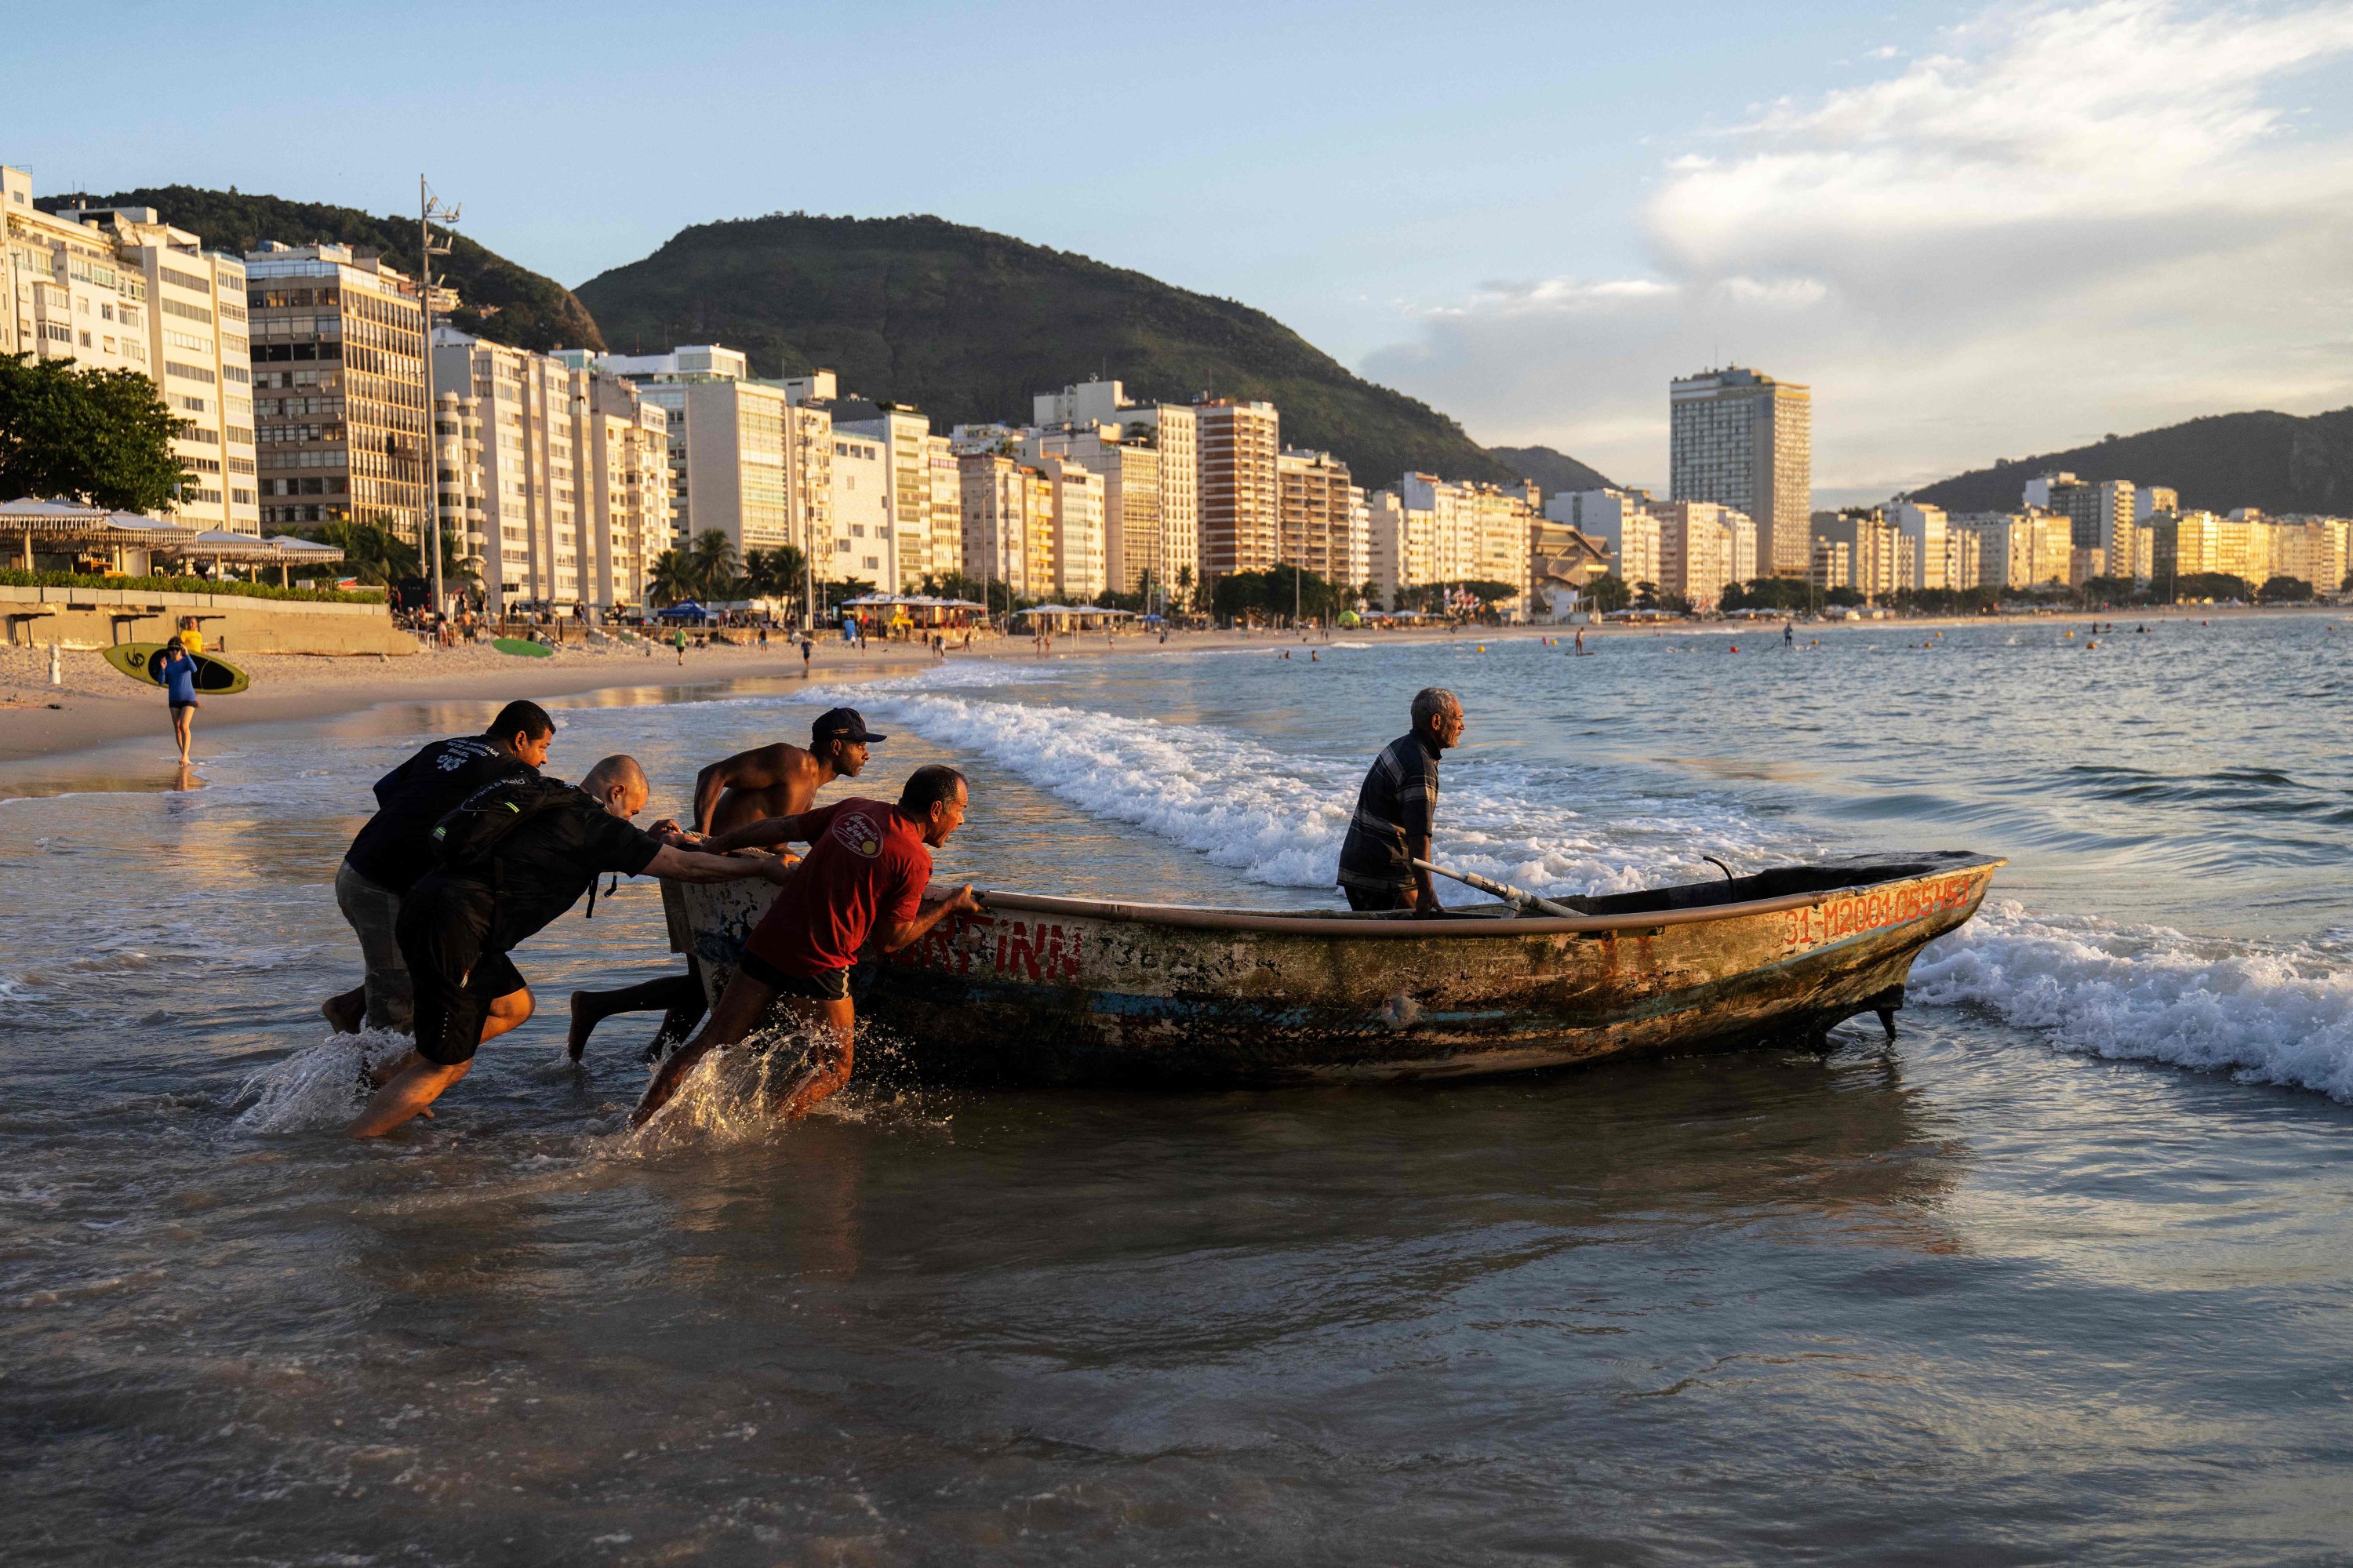 Brazil's fishermen fight to preserve traditions amidst industrial